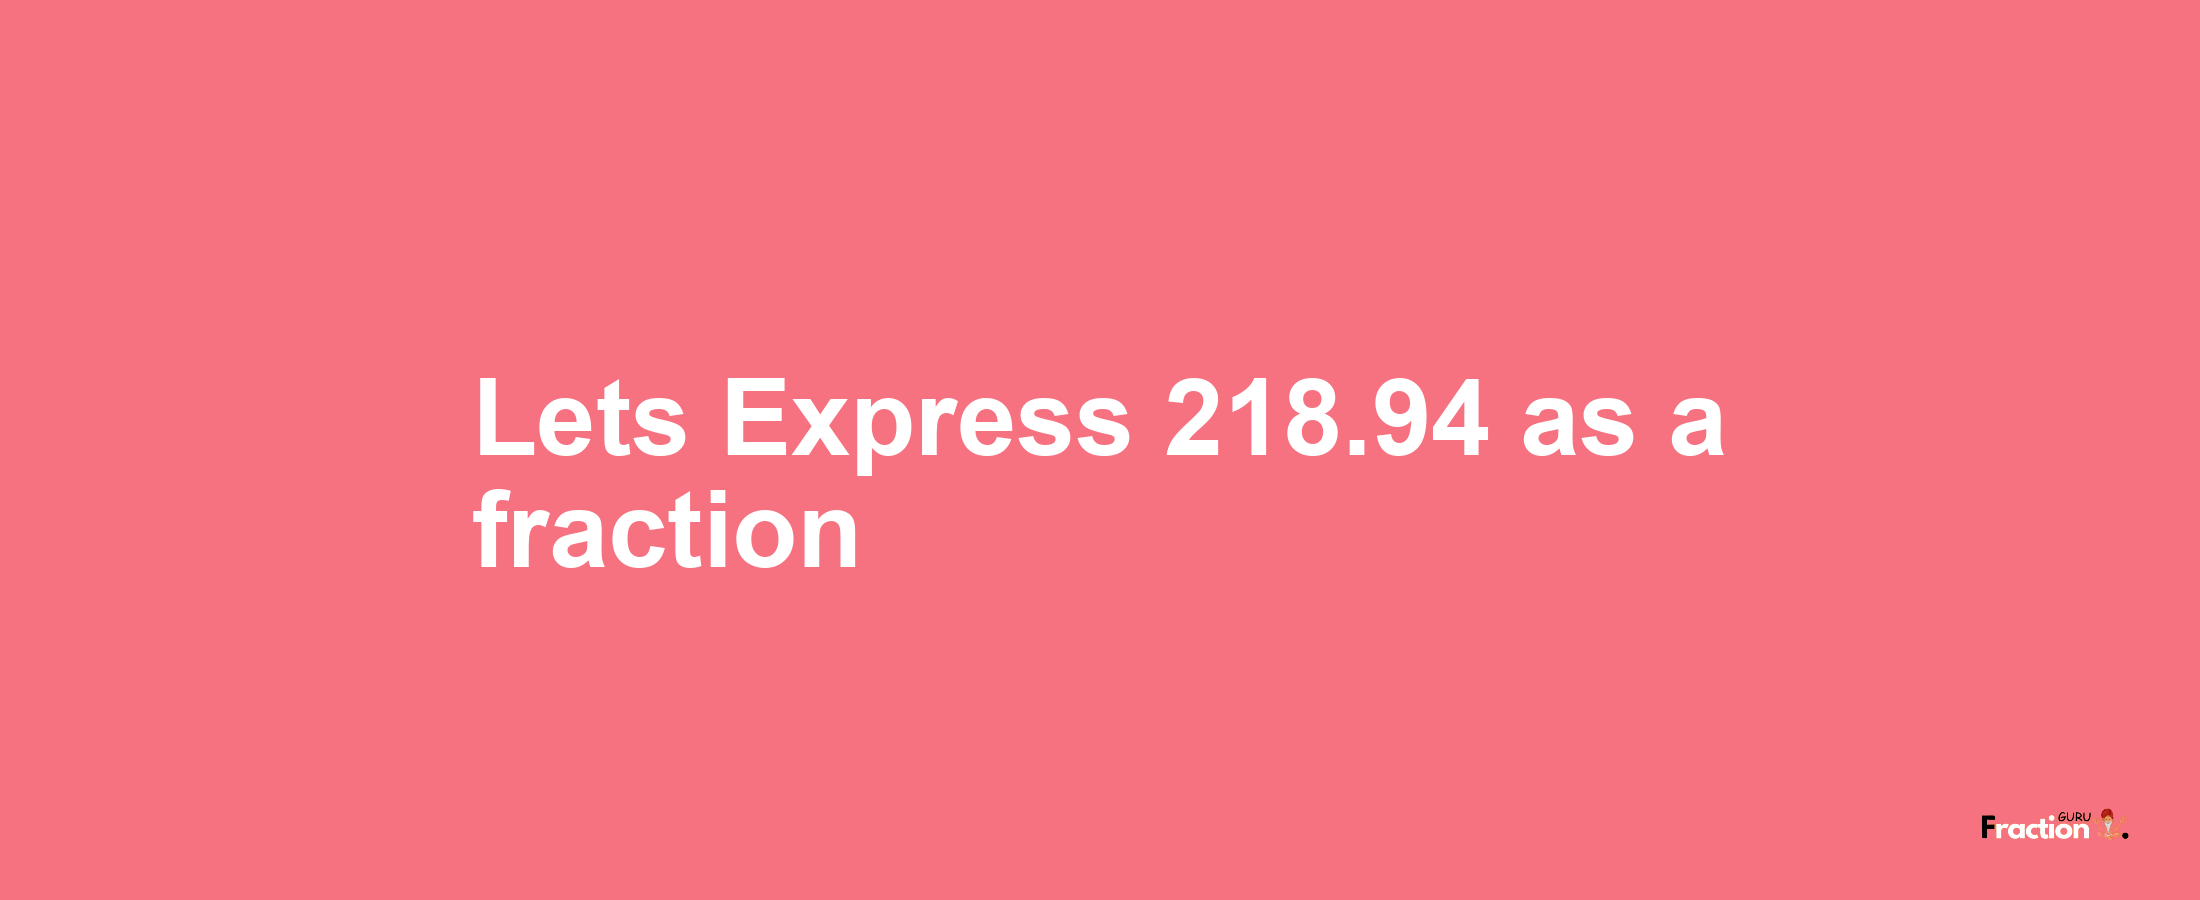 Lets Express 218.94 as afraction